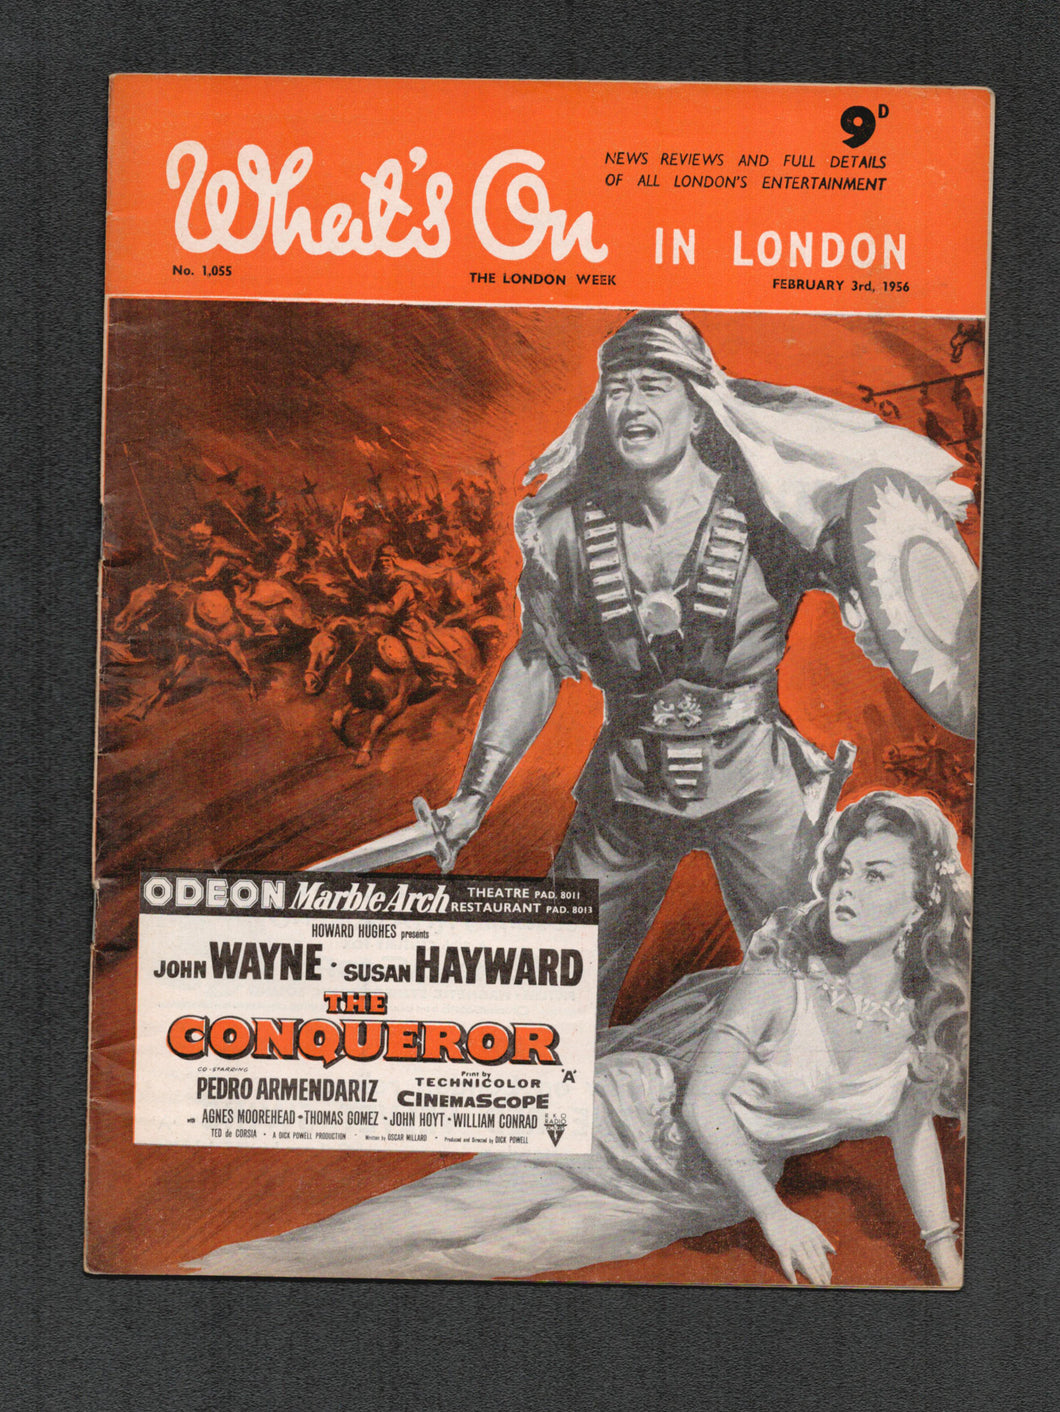 Whats On No 1055 Jan 13 1956